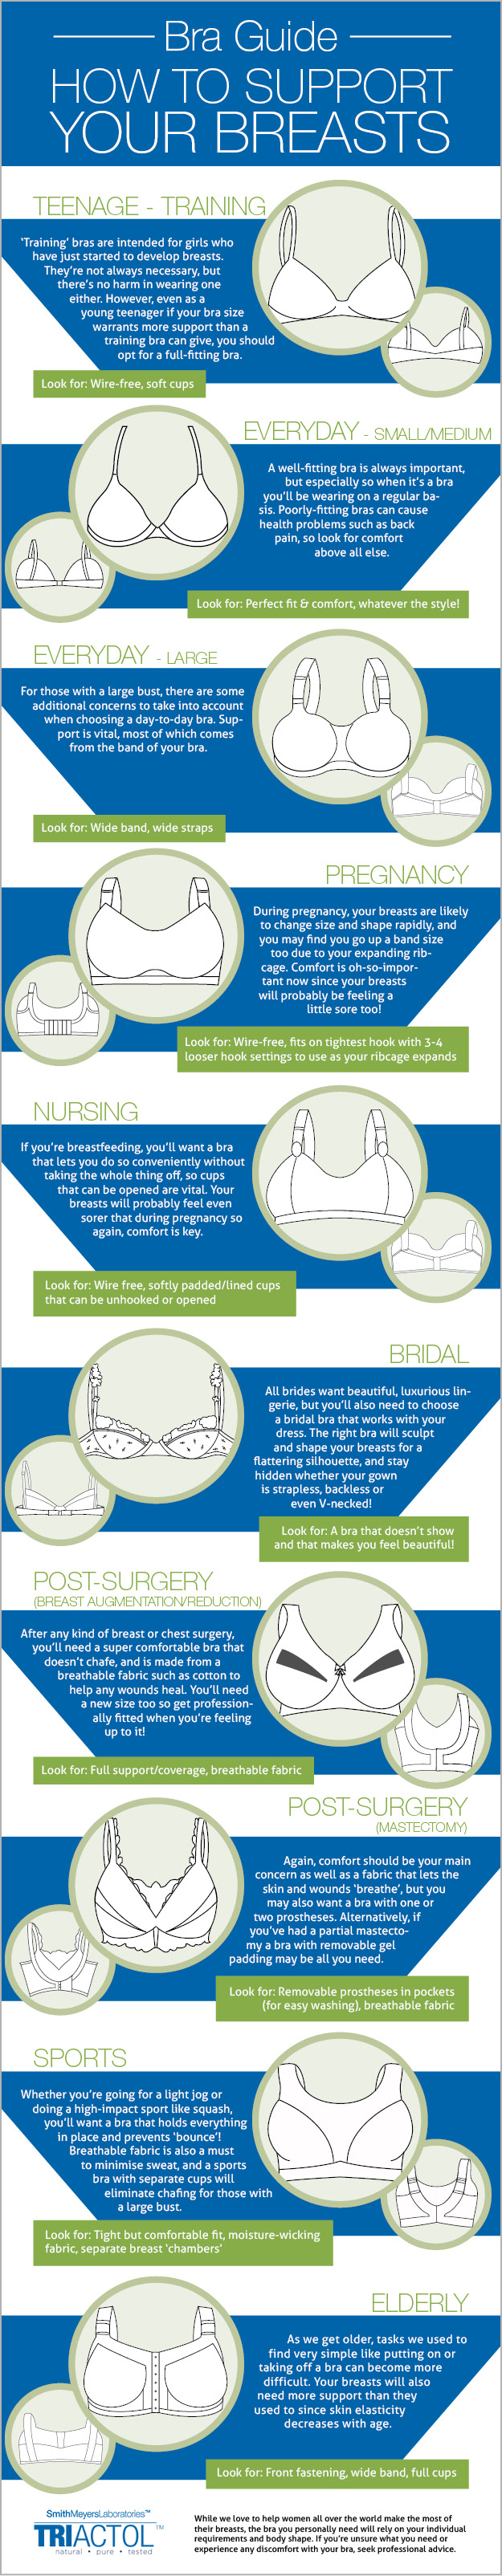 A Bra Guide: How To Support Your Breasts